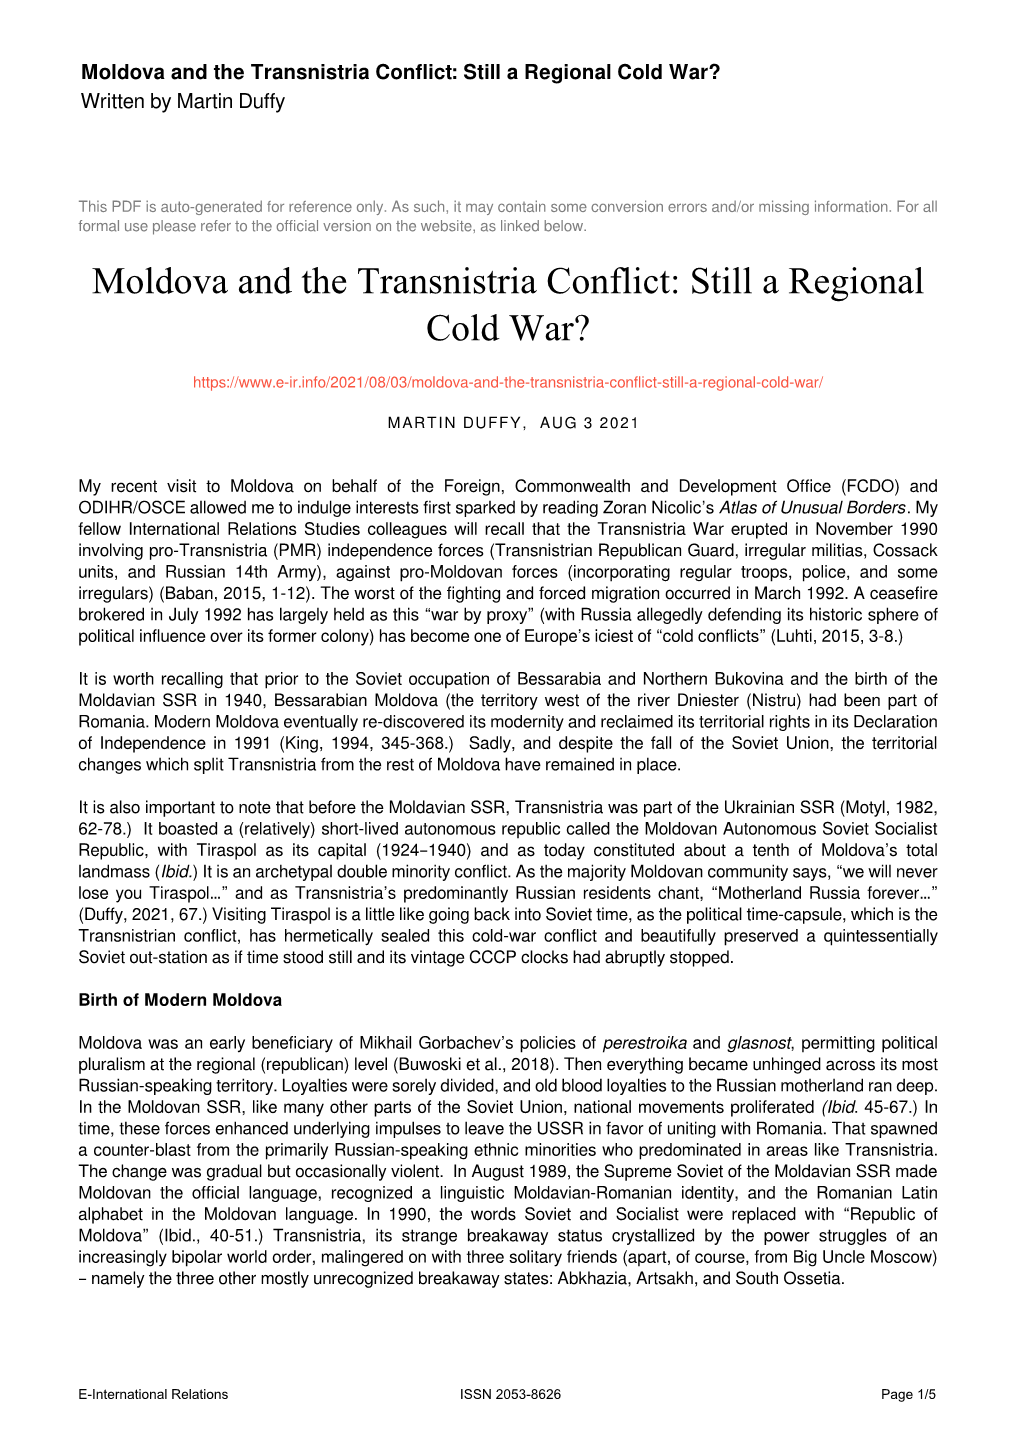 Moldova and the Transnistria Conflict: Still a Regional Cold War? Written by Martin Duffy